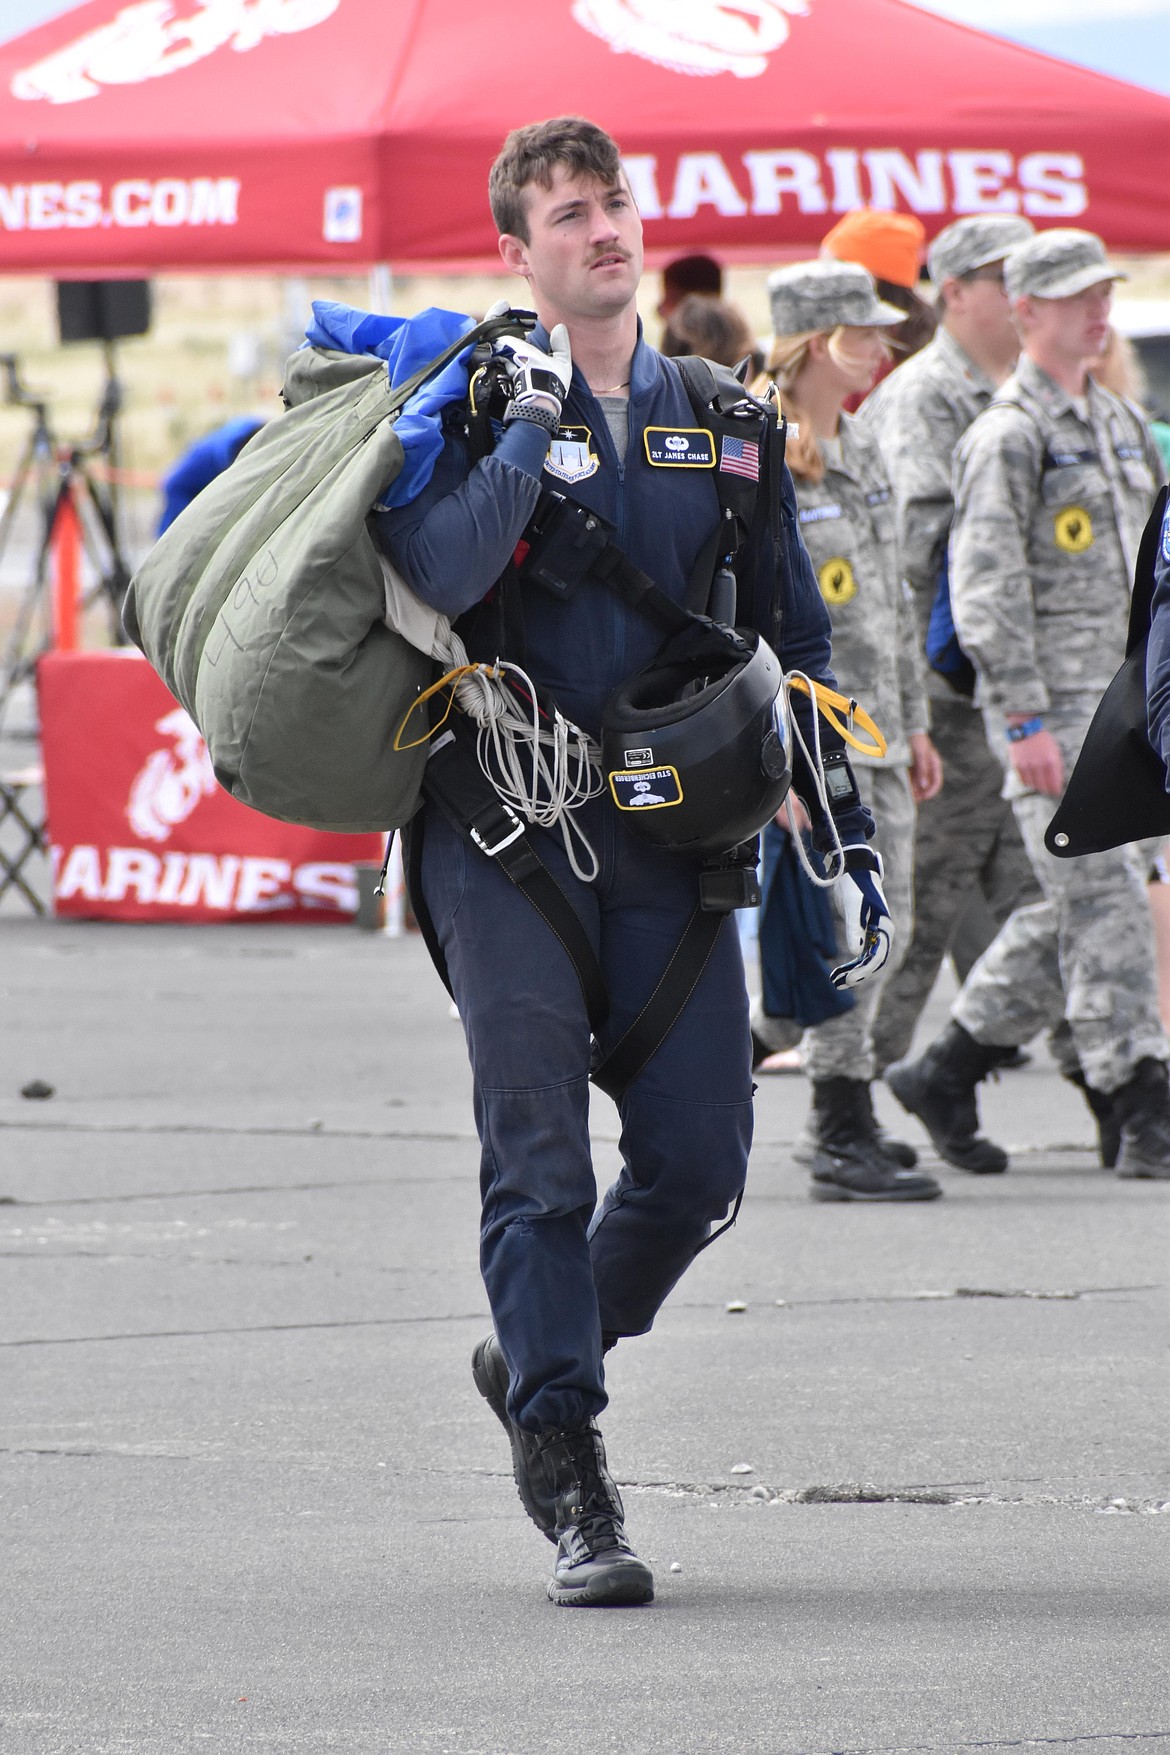 Second Lt. James Chase of the U.S. Air Force Academy carries his gear on the tarmac at the Moses Lake Airshow. The show gives civilians an opportunity to interact with service members from nearly all of the branches of the U.S. military.